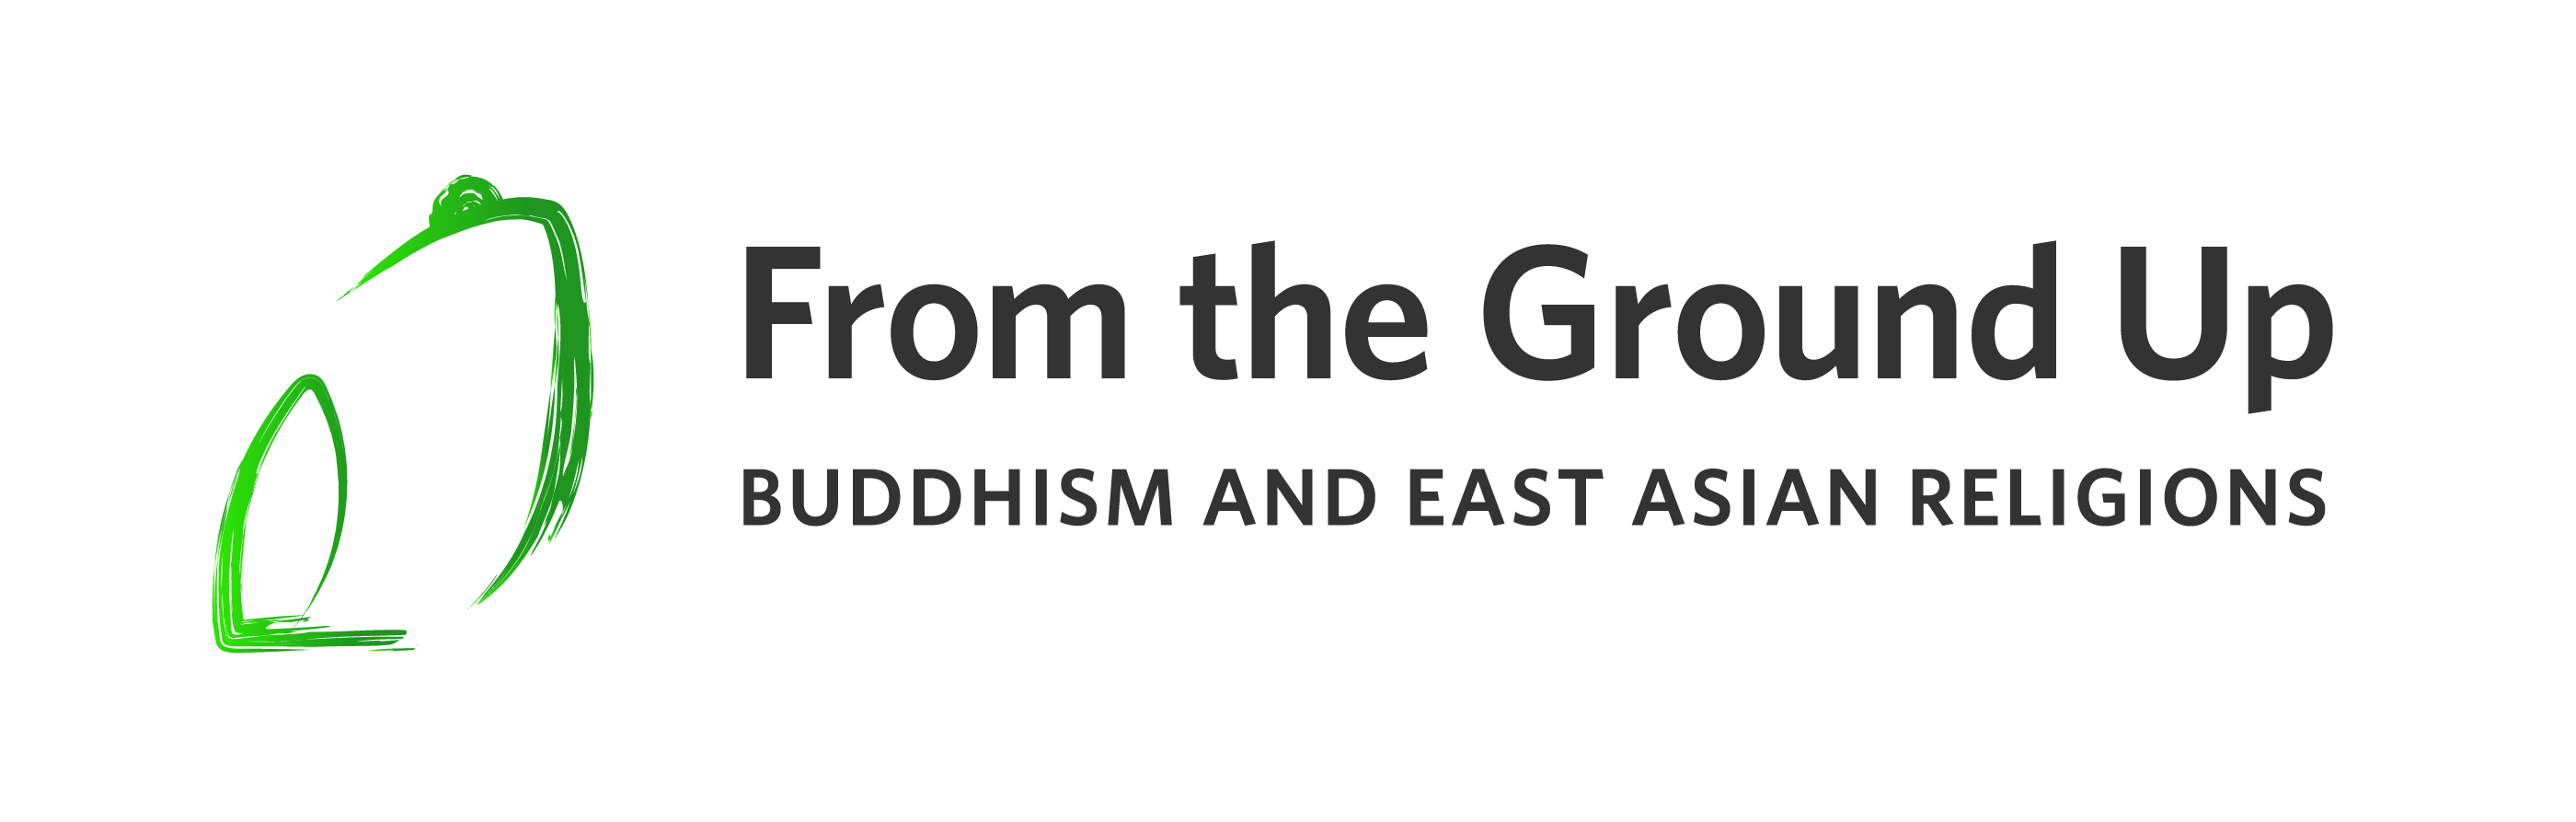 From the Ground Up: Buddhism & East Asian Religions